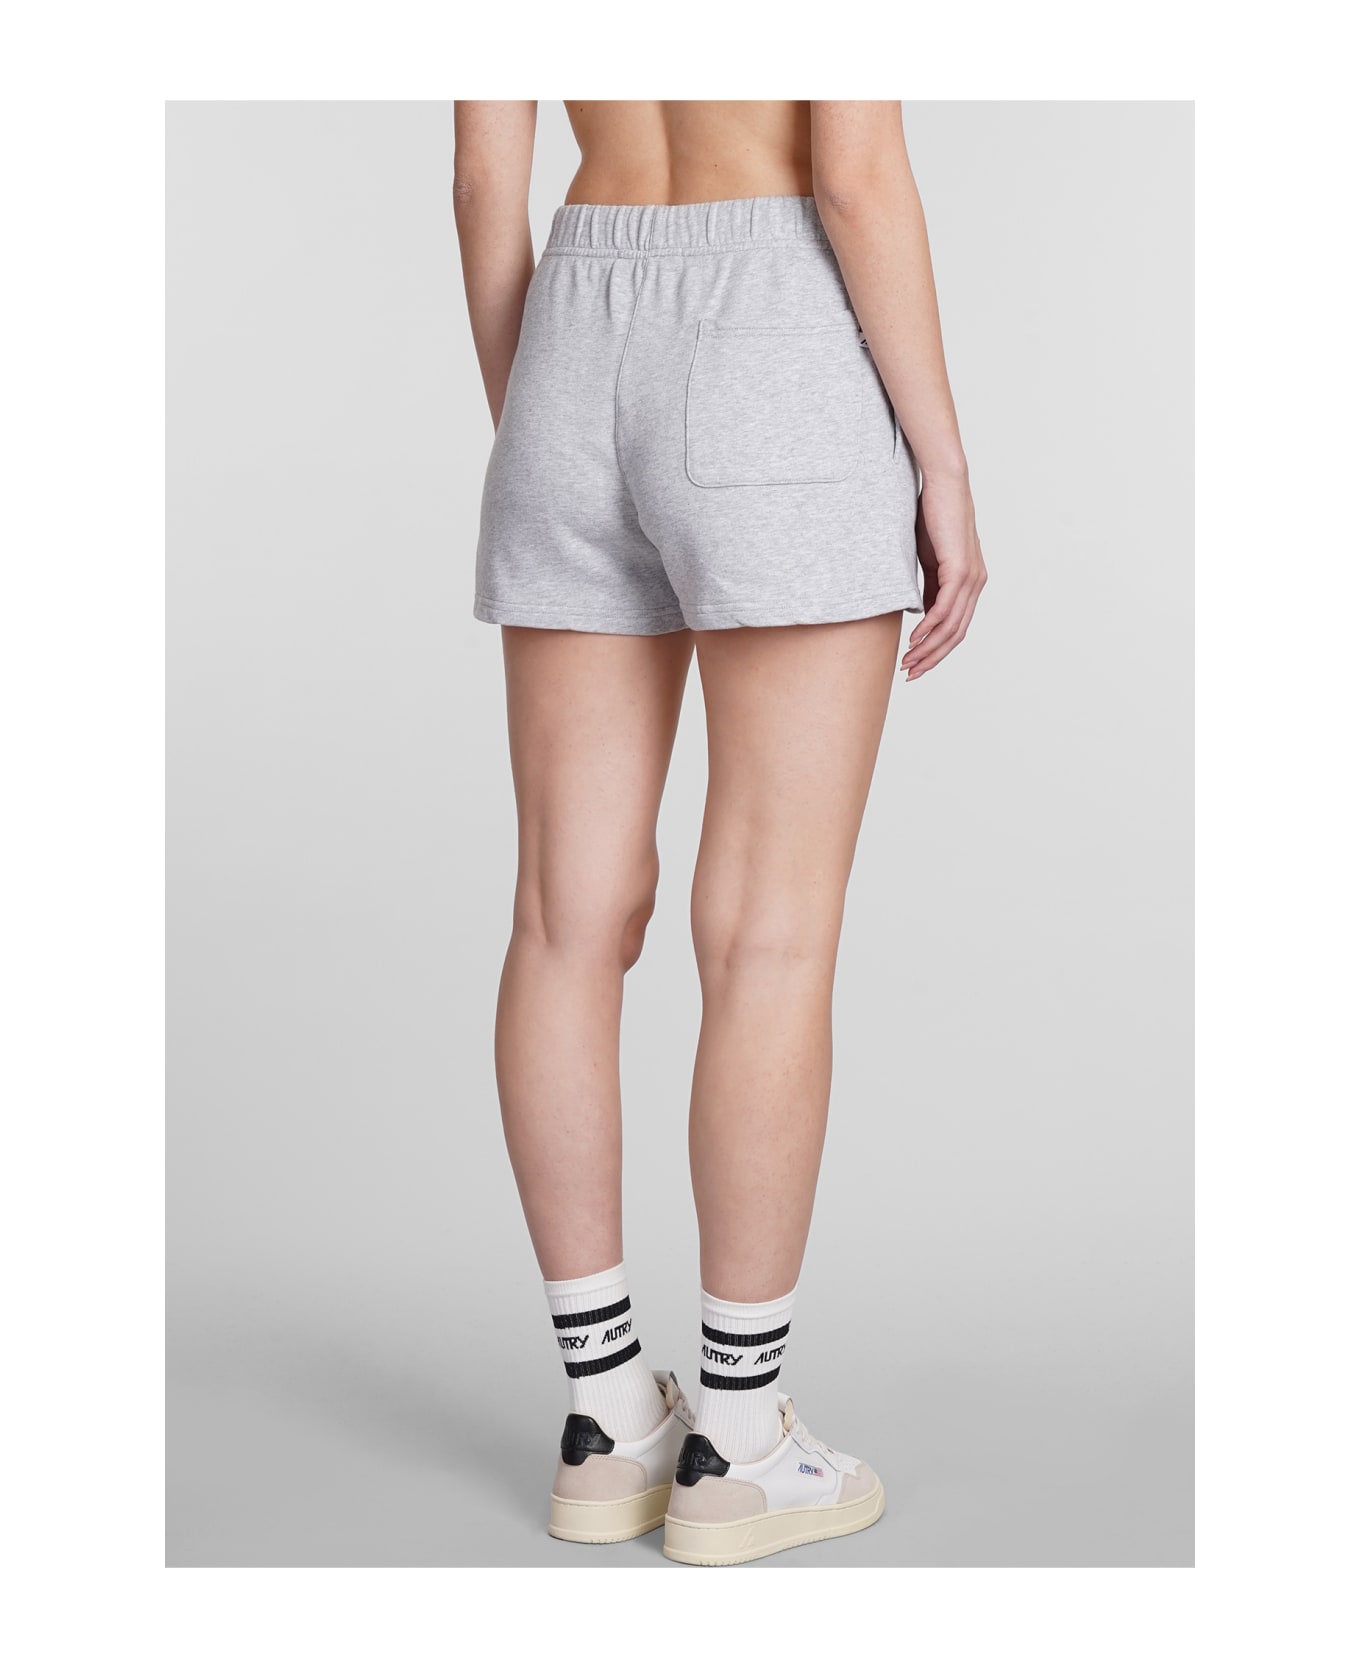 Autry Shorts In Grey Cotton - grey